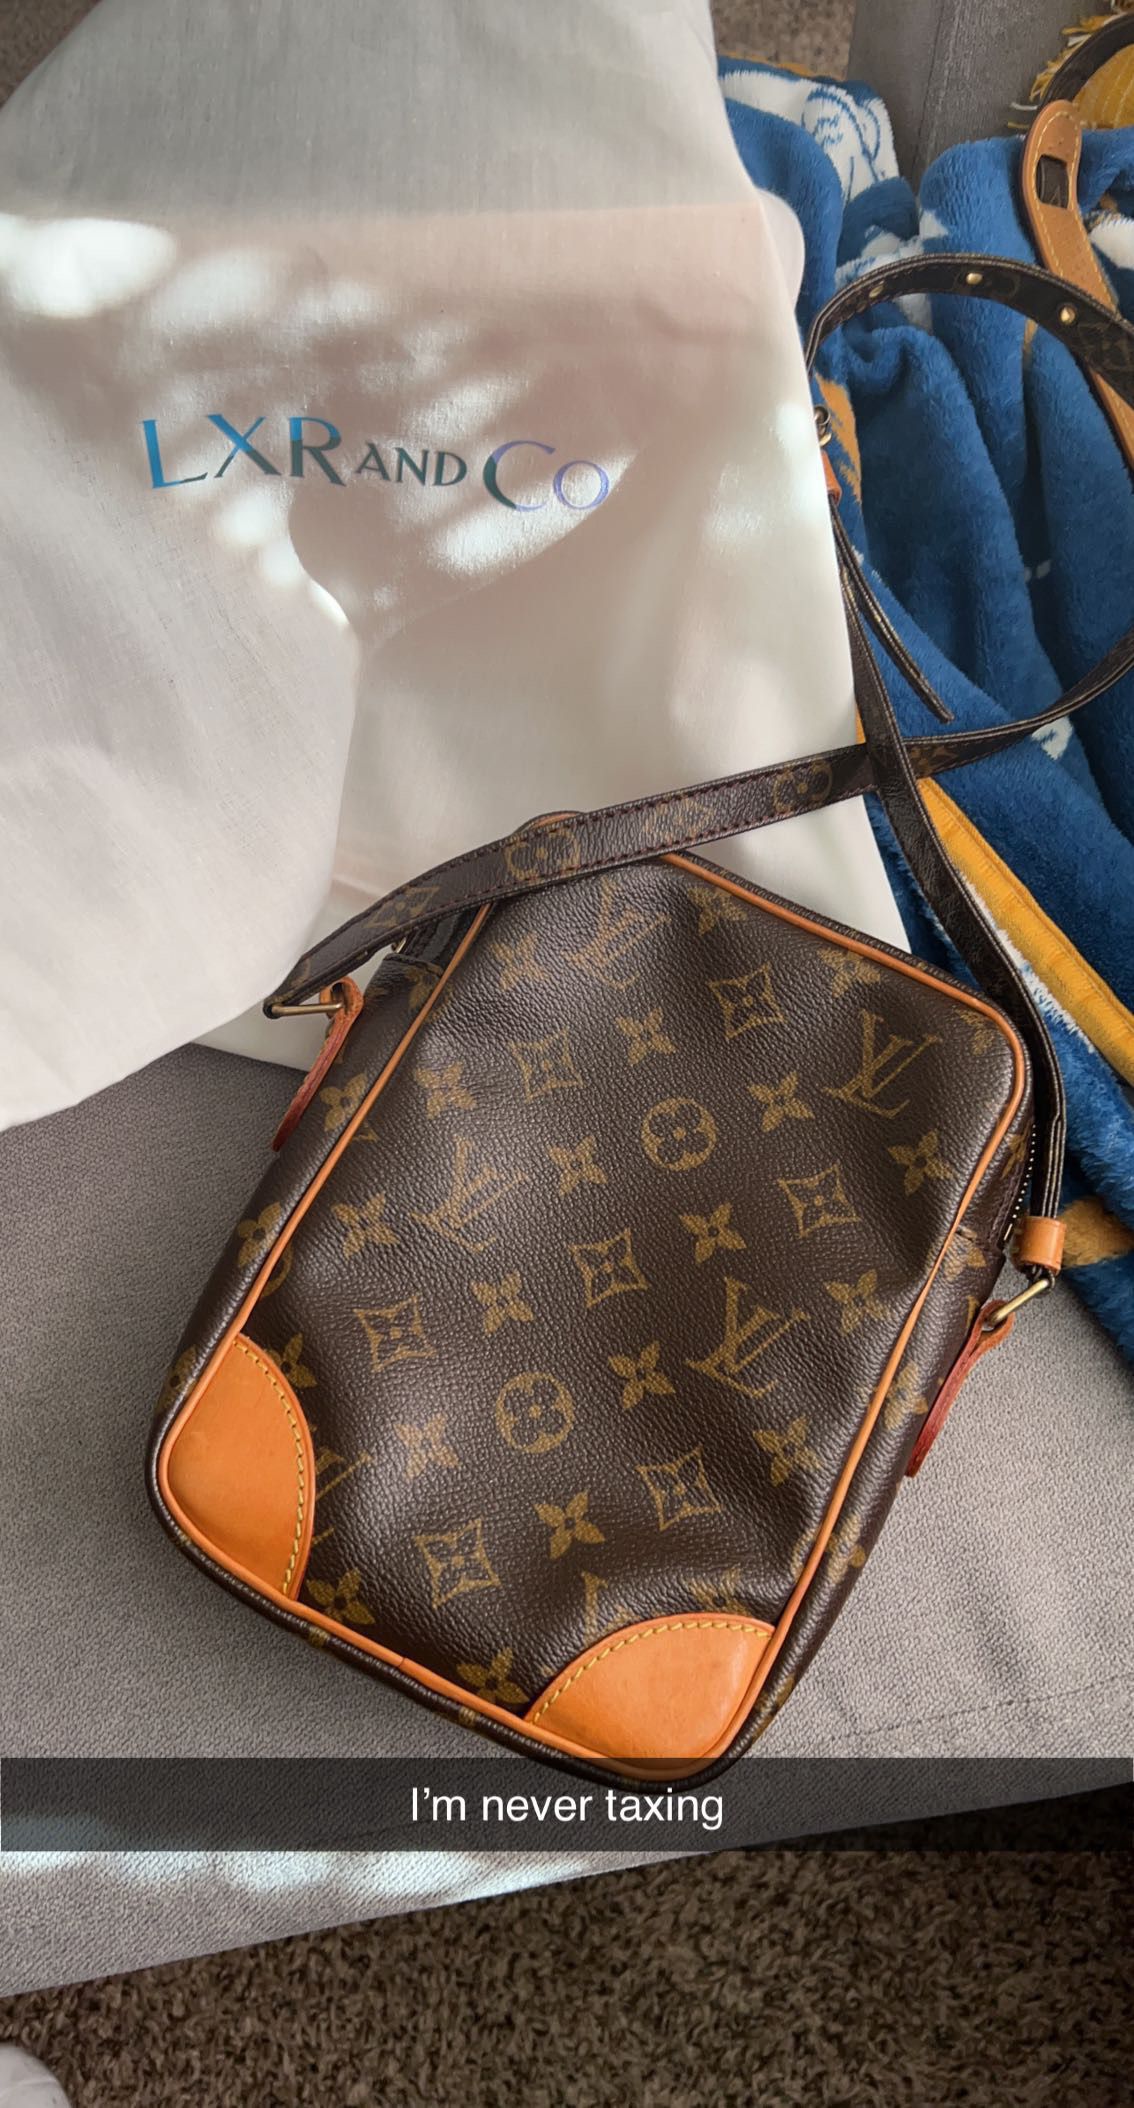 Louis Vuitton Danube Crossbody Authenticated By LXR